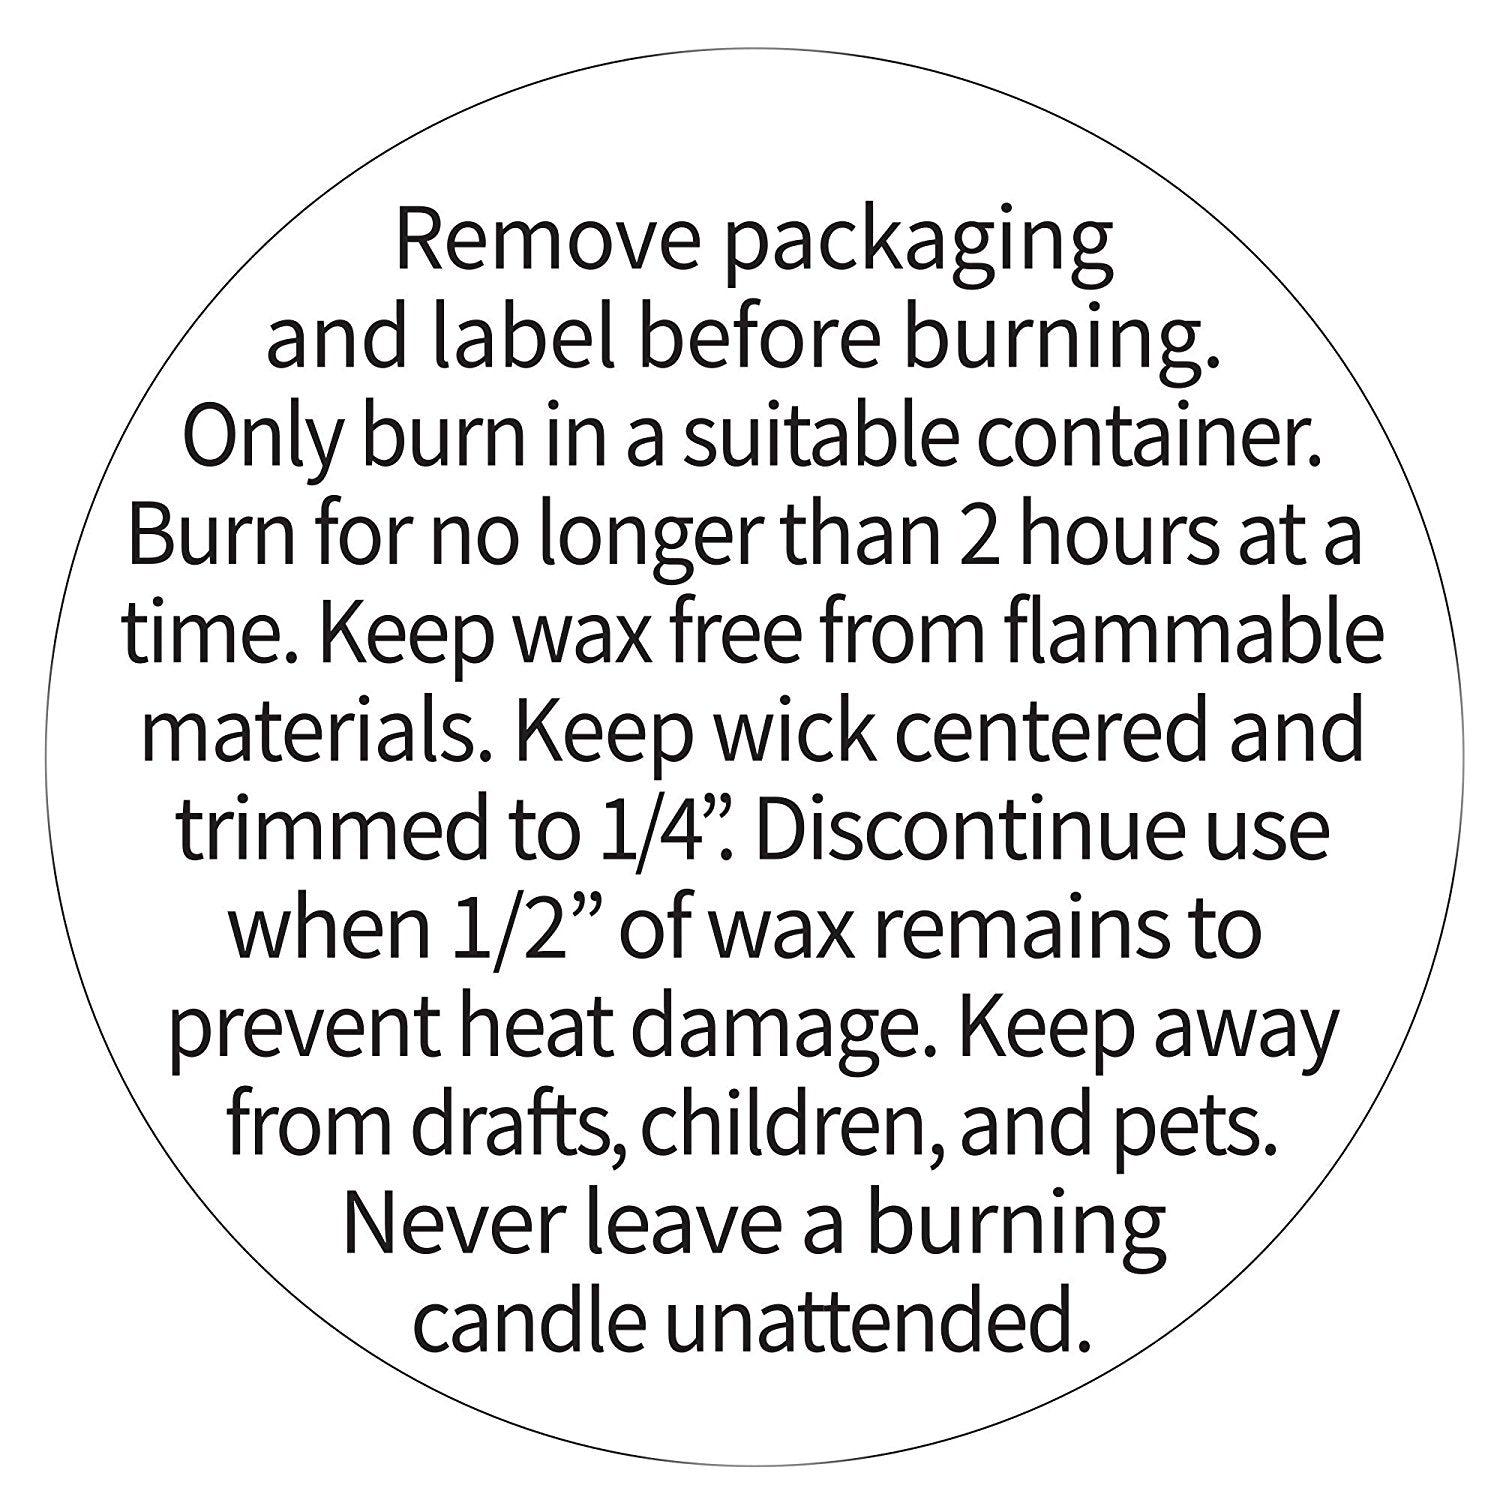 Candle Warning Labels 1.5 inch Candle Jar Container Stickers Candle Making Stickers  Warning 500 Pcs Per Roll Waterproof Candle Safety Labels Sticker Decal for  Soy Wax Candle Jars,Tins and Votives